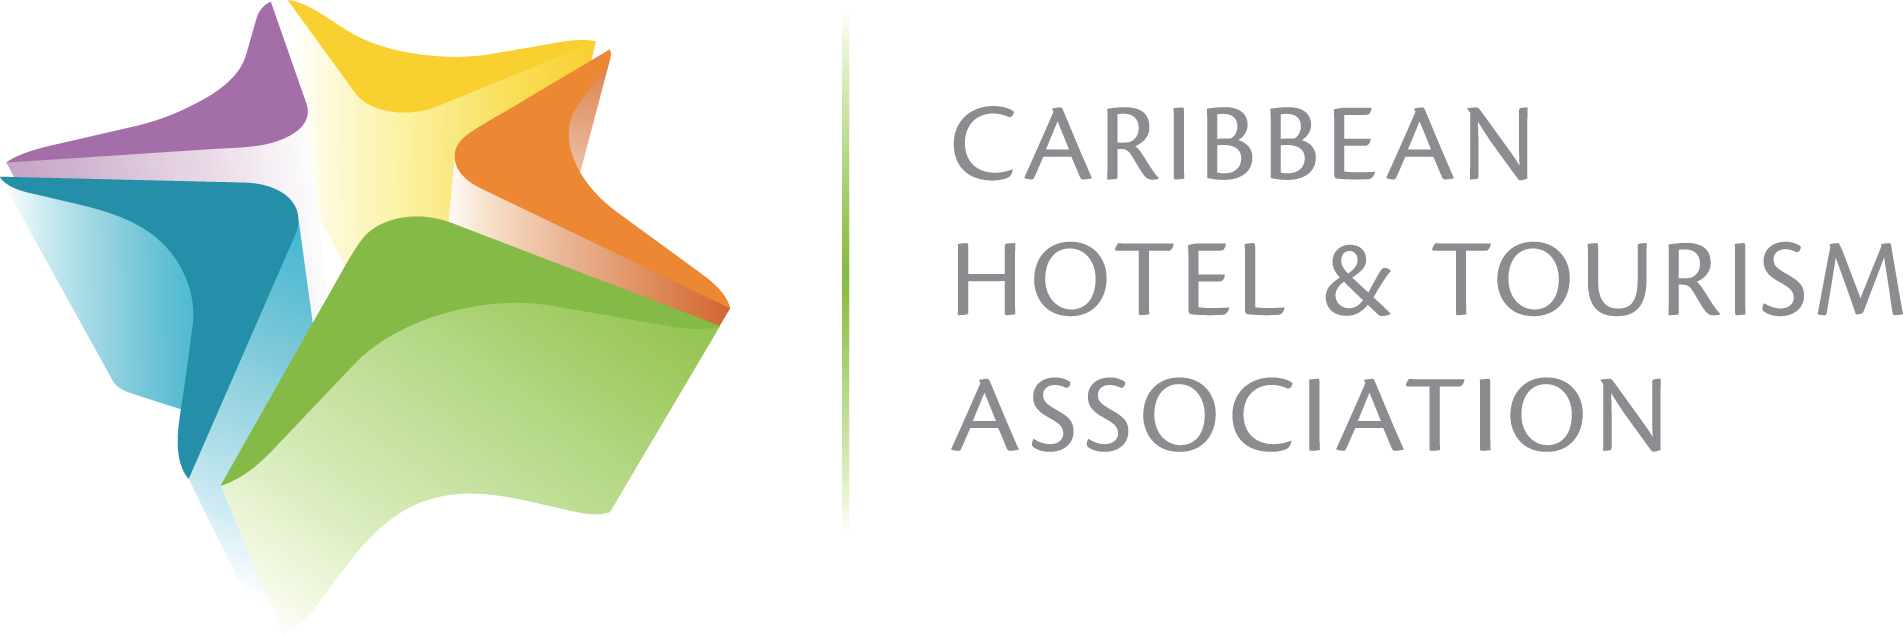 caribbean hotel and tourism association